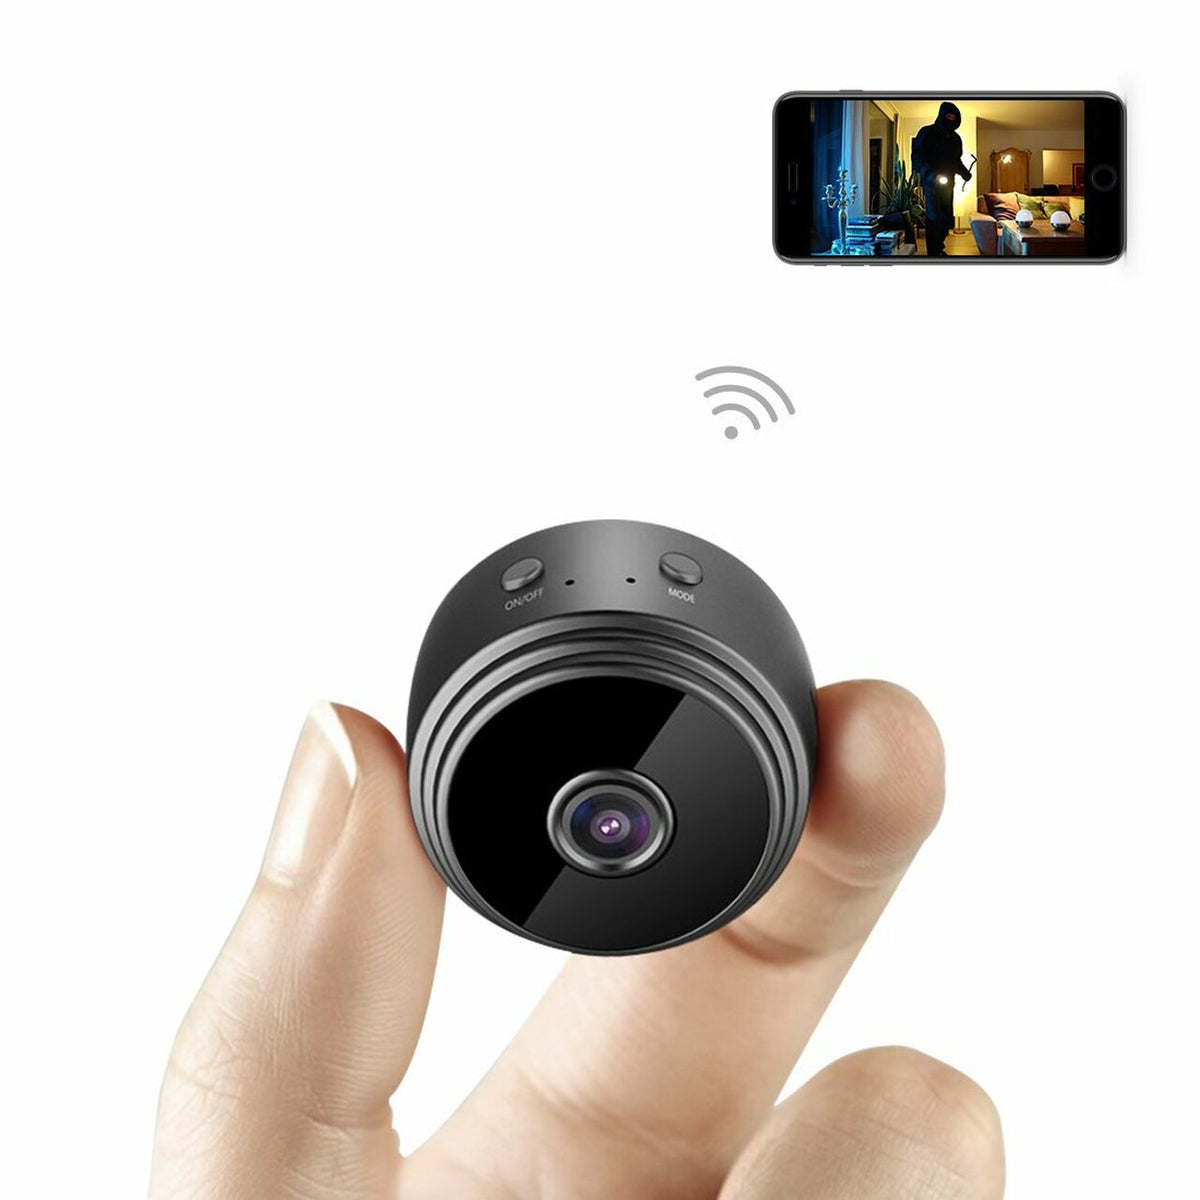 Small WiFi Hidden Video Camera Surveillance Security 1080P Indoor Nanny Cam Motion Detection and Night Vision Wireless for iPhone or Android